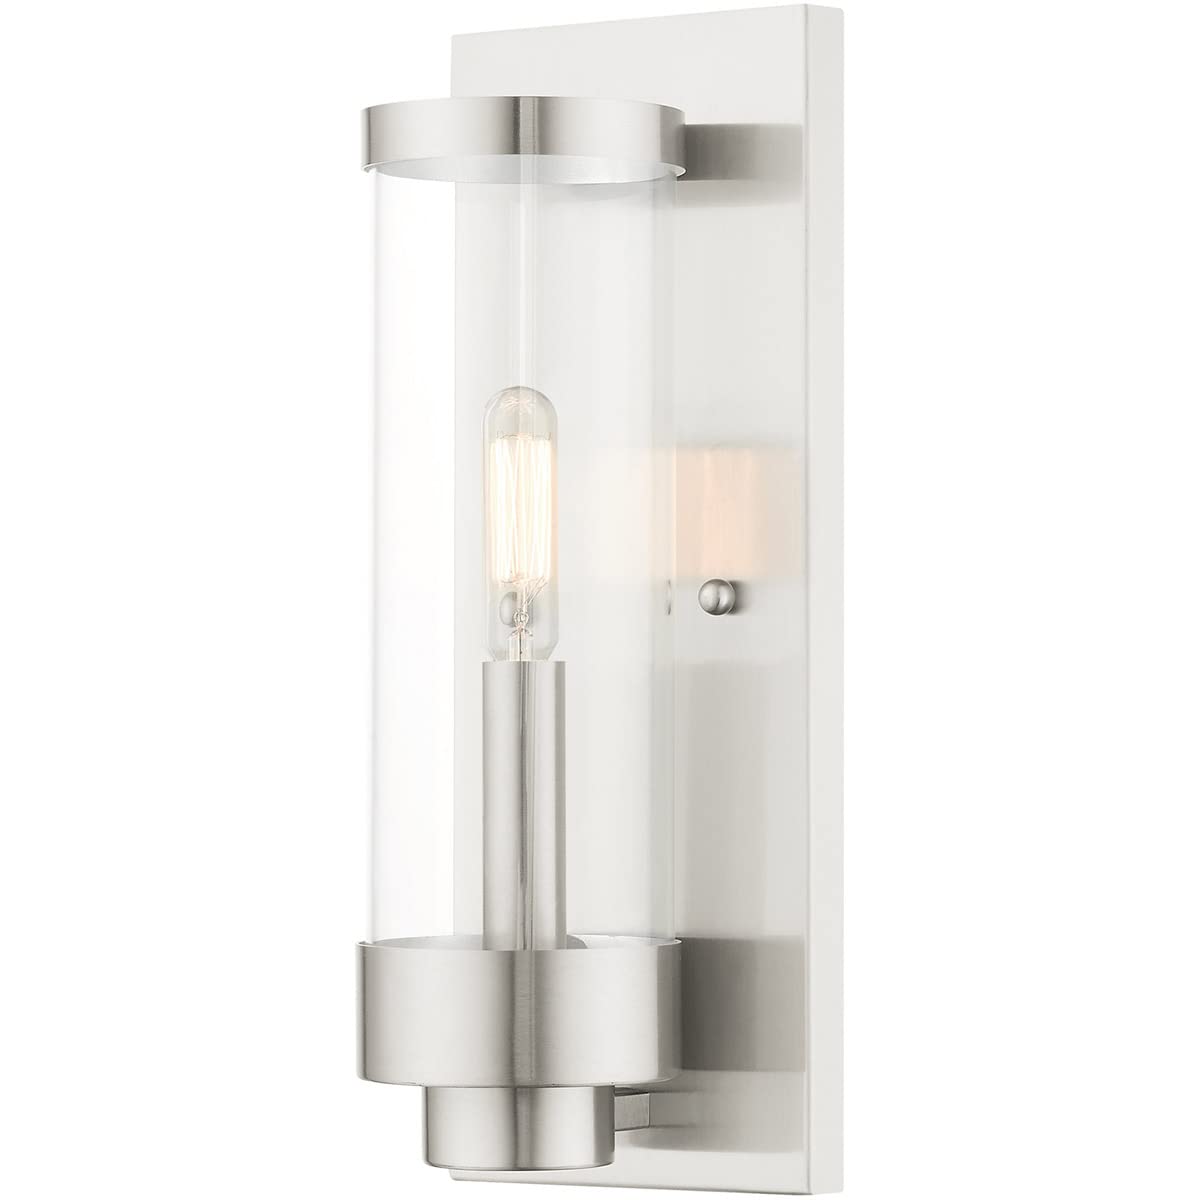 Livex Lighting 20721-91 Hillcrest - One Light Outdoor ADA Wall Lantern, Brushed Nickel Finish with Clear Glass